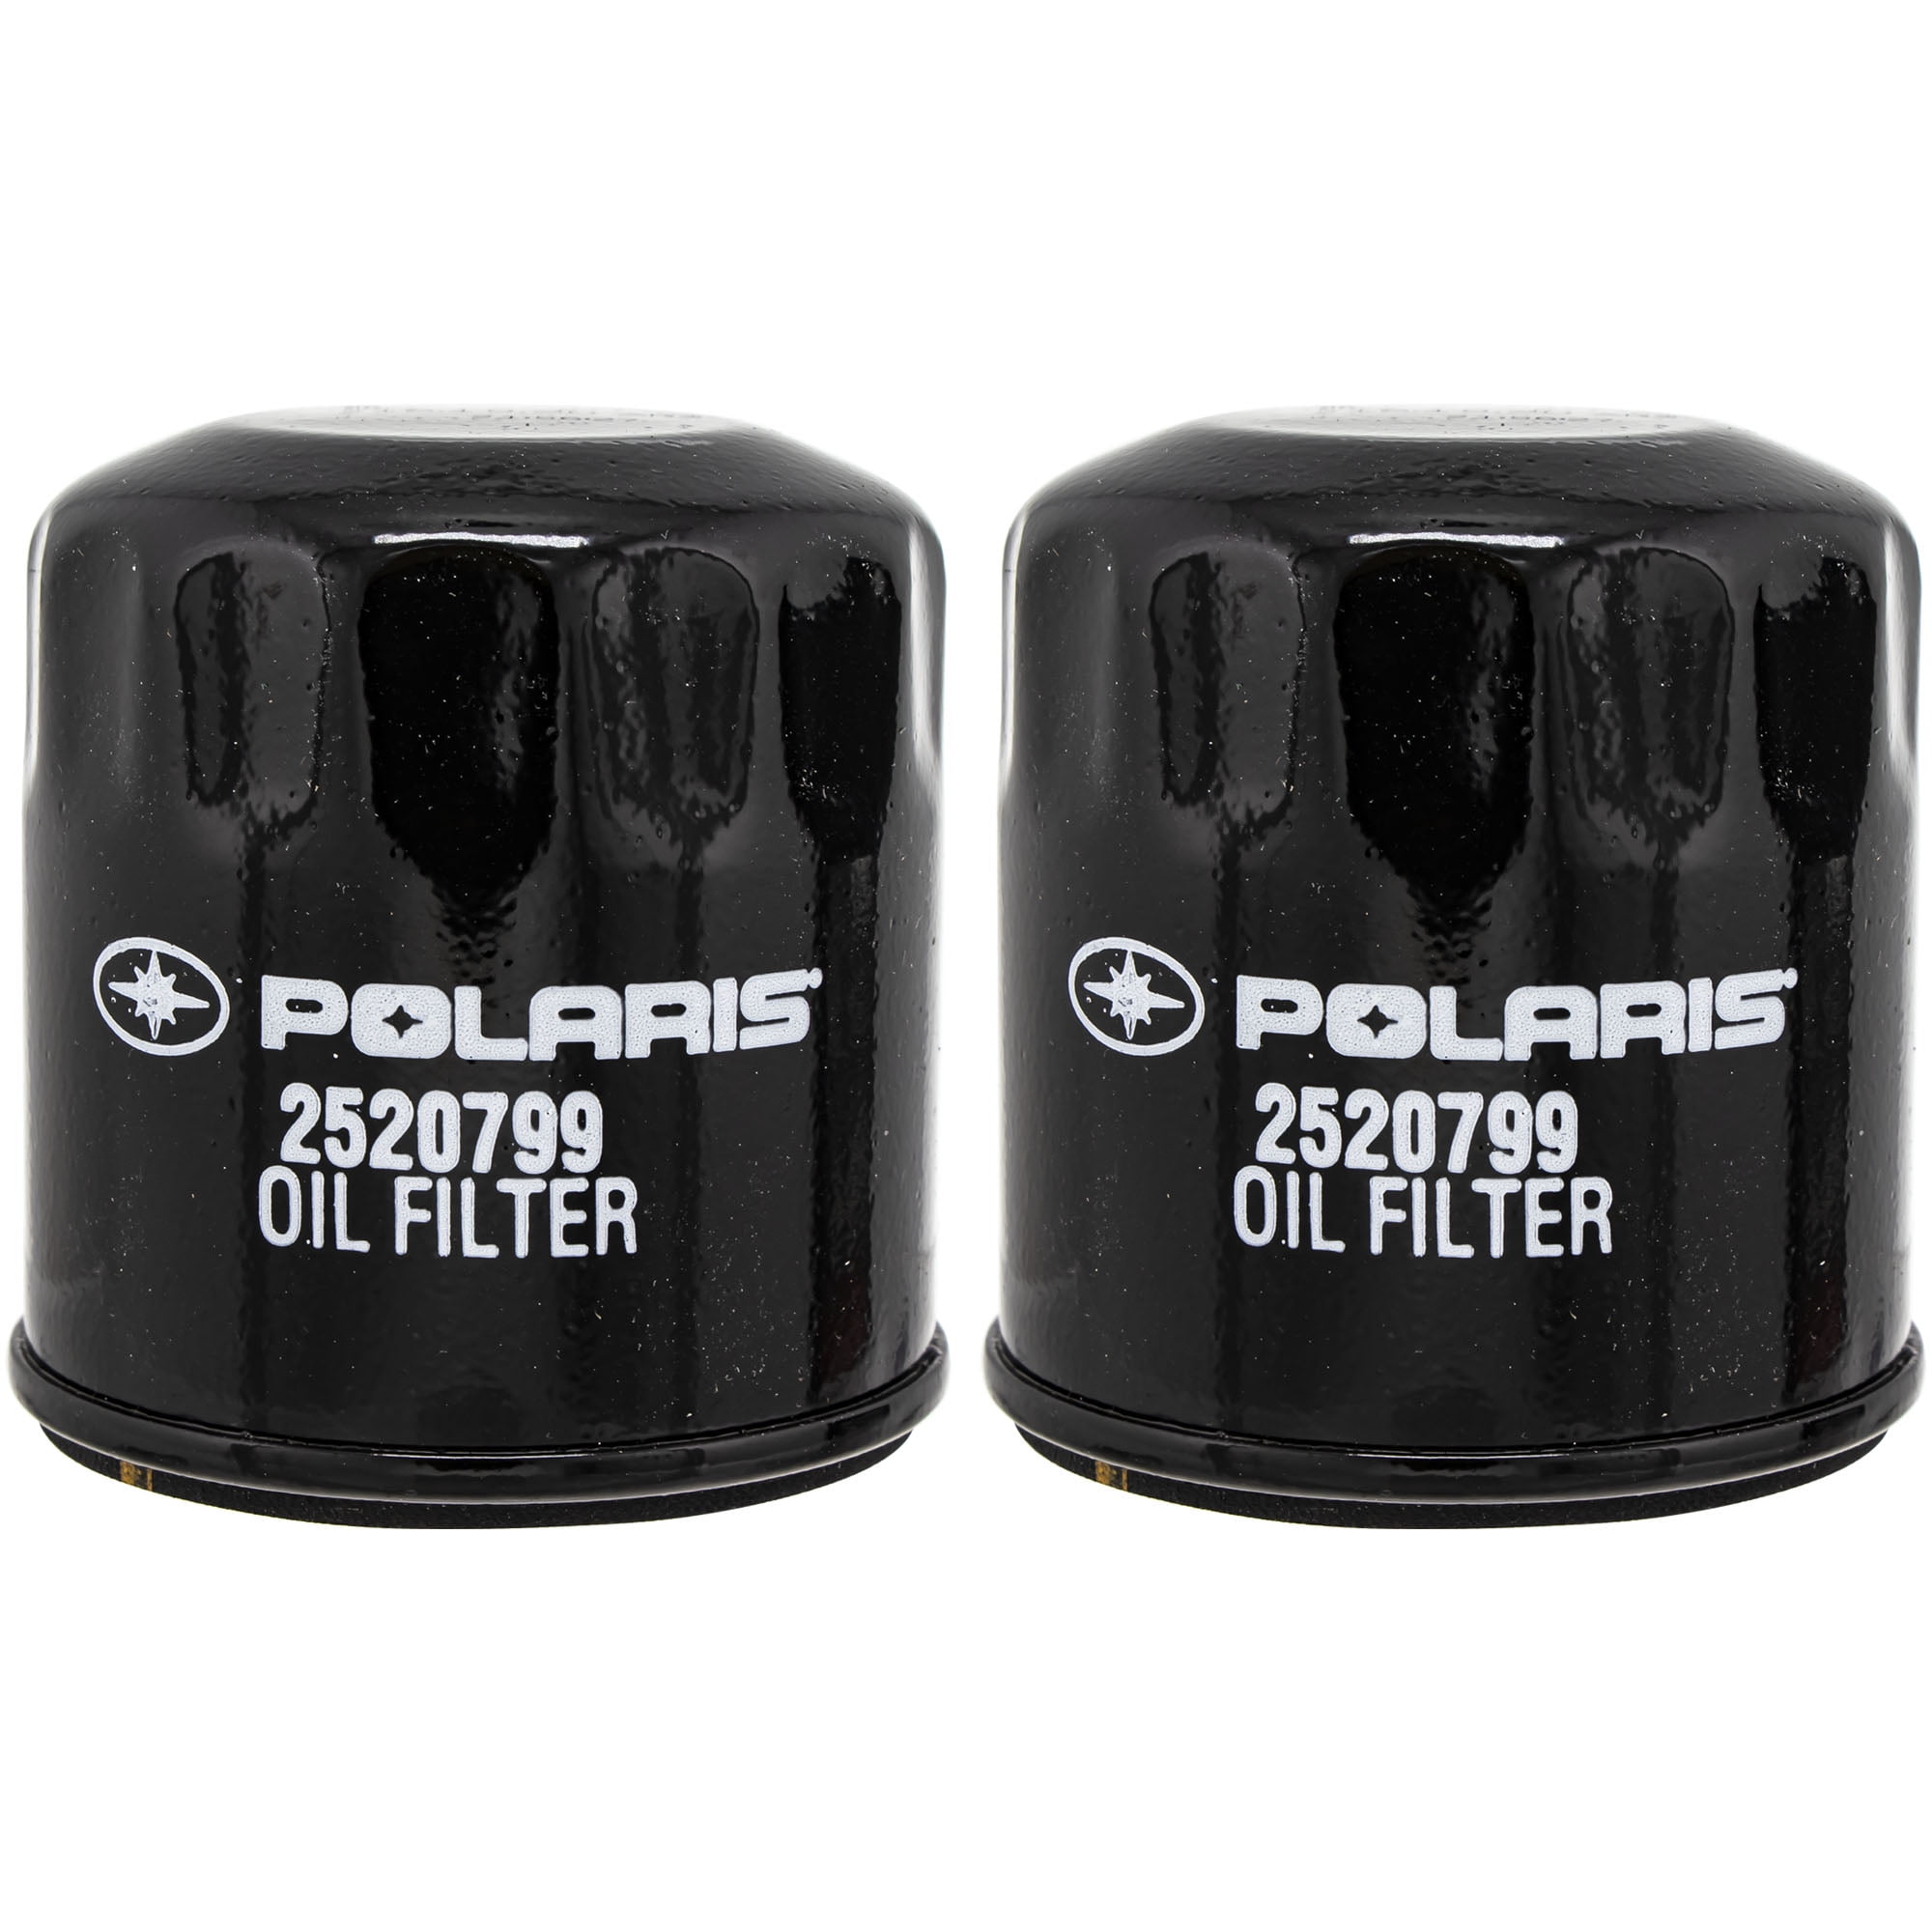 Heating Oil Fuel Filter "Pure Oil" White 